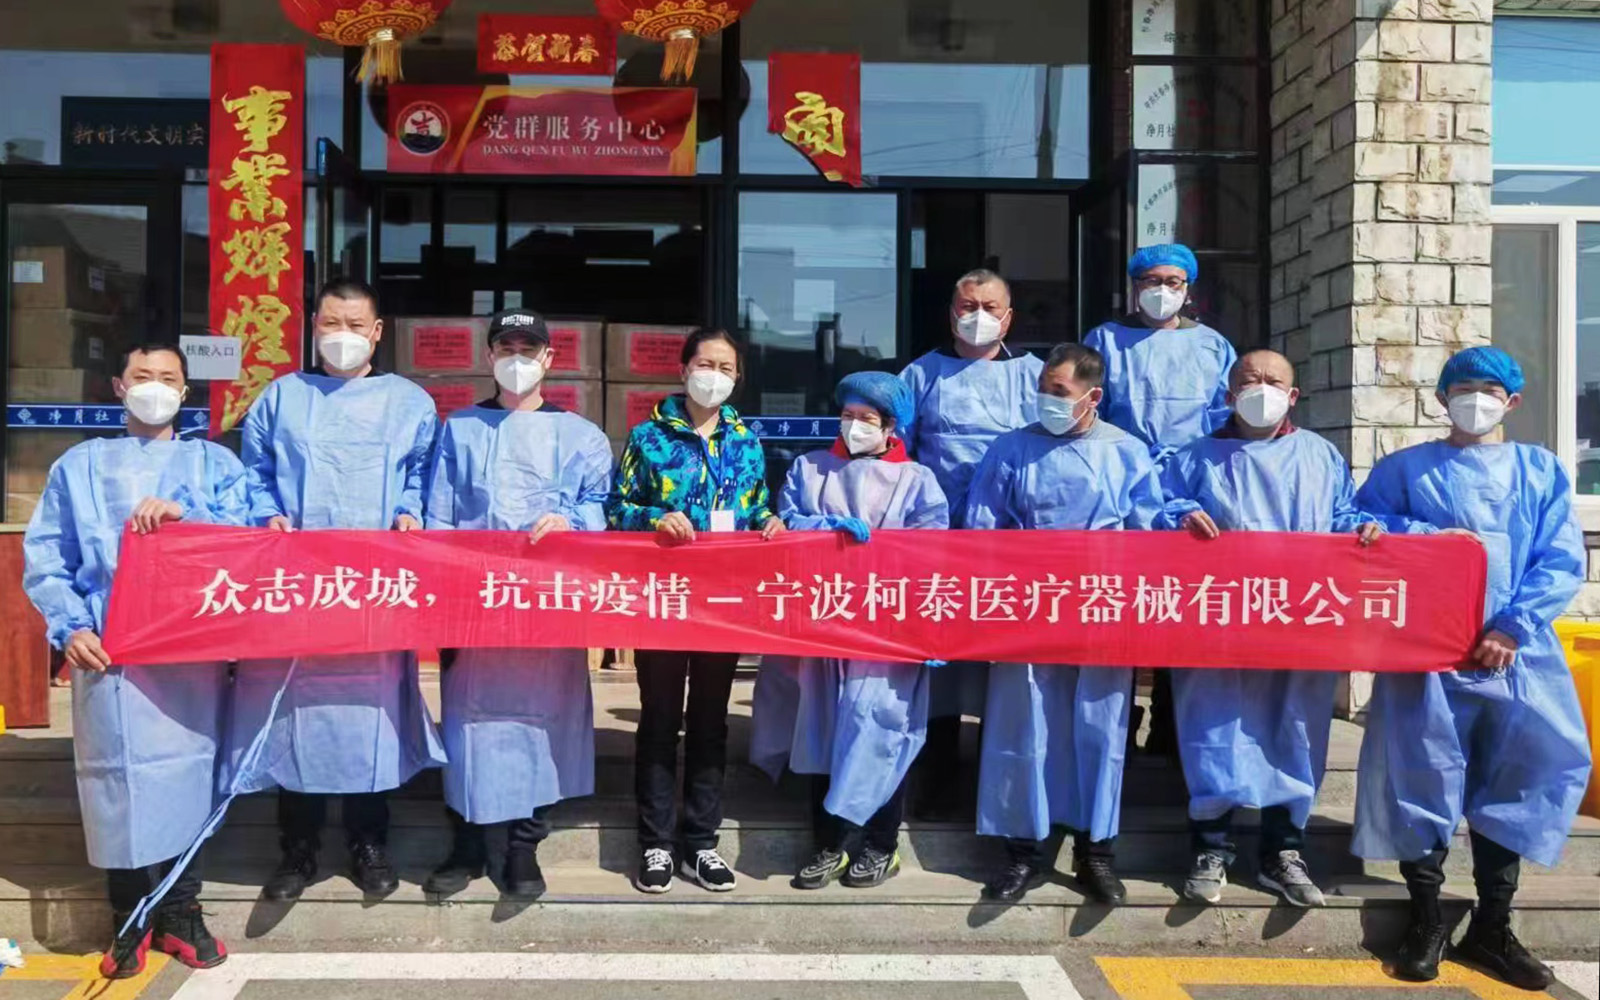 Greetmed Medical has donated equipment to Changchun under the wish of battling the epidemic together greetmed